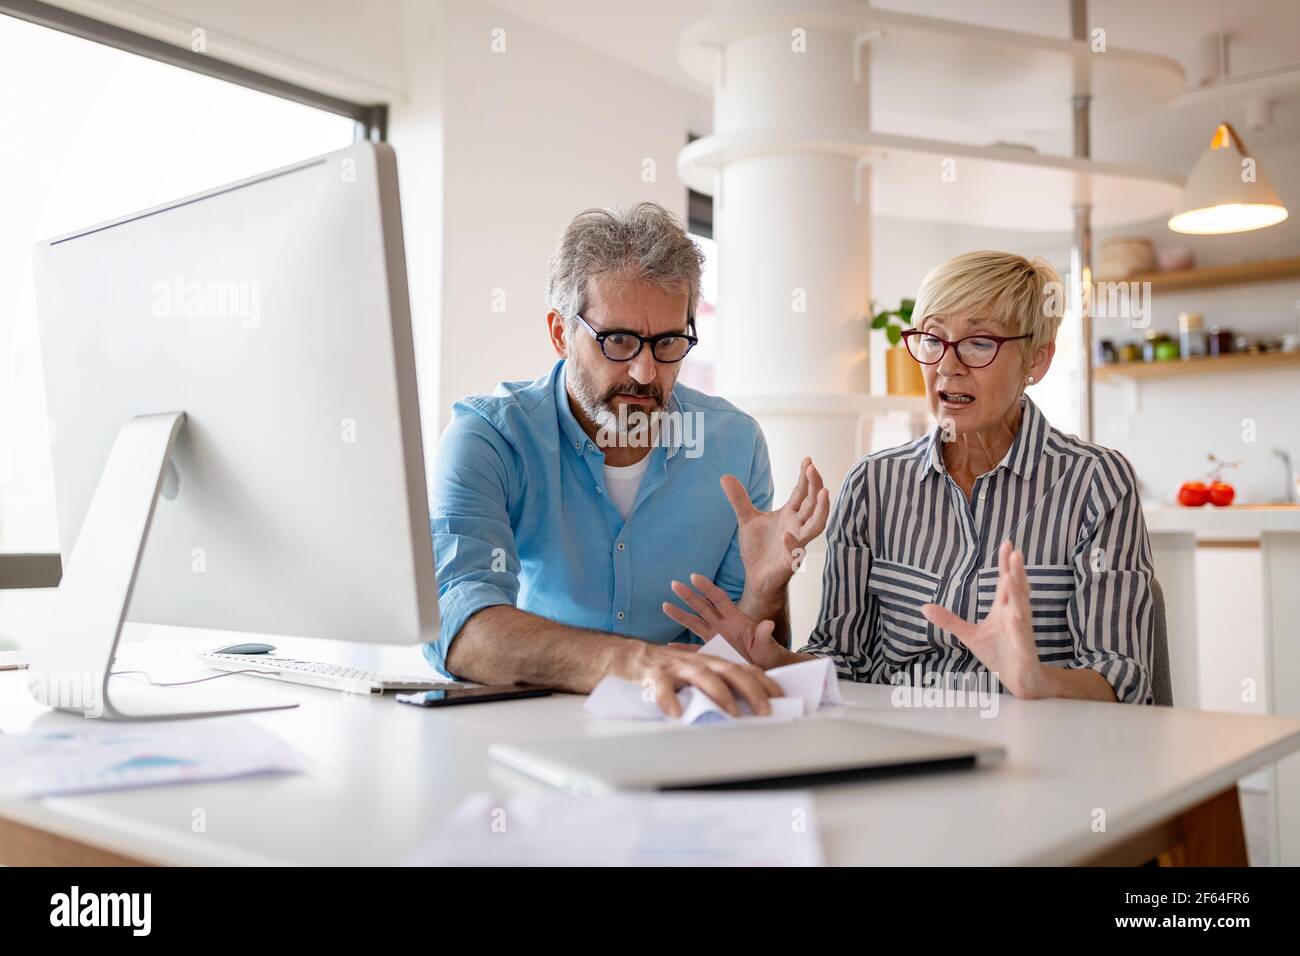 Overworked senior business people have stress, exhaustion in office Stock Photo